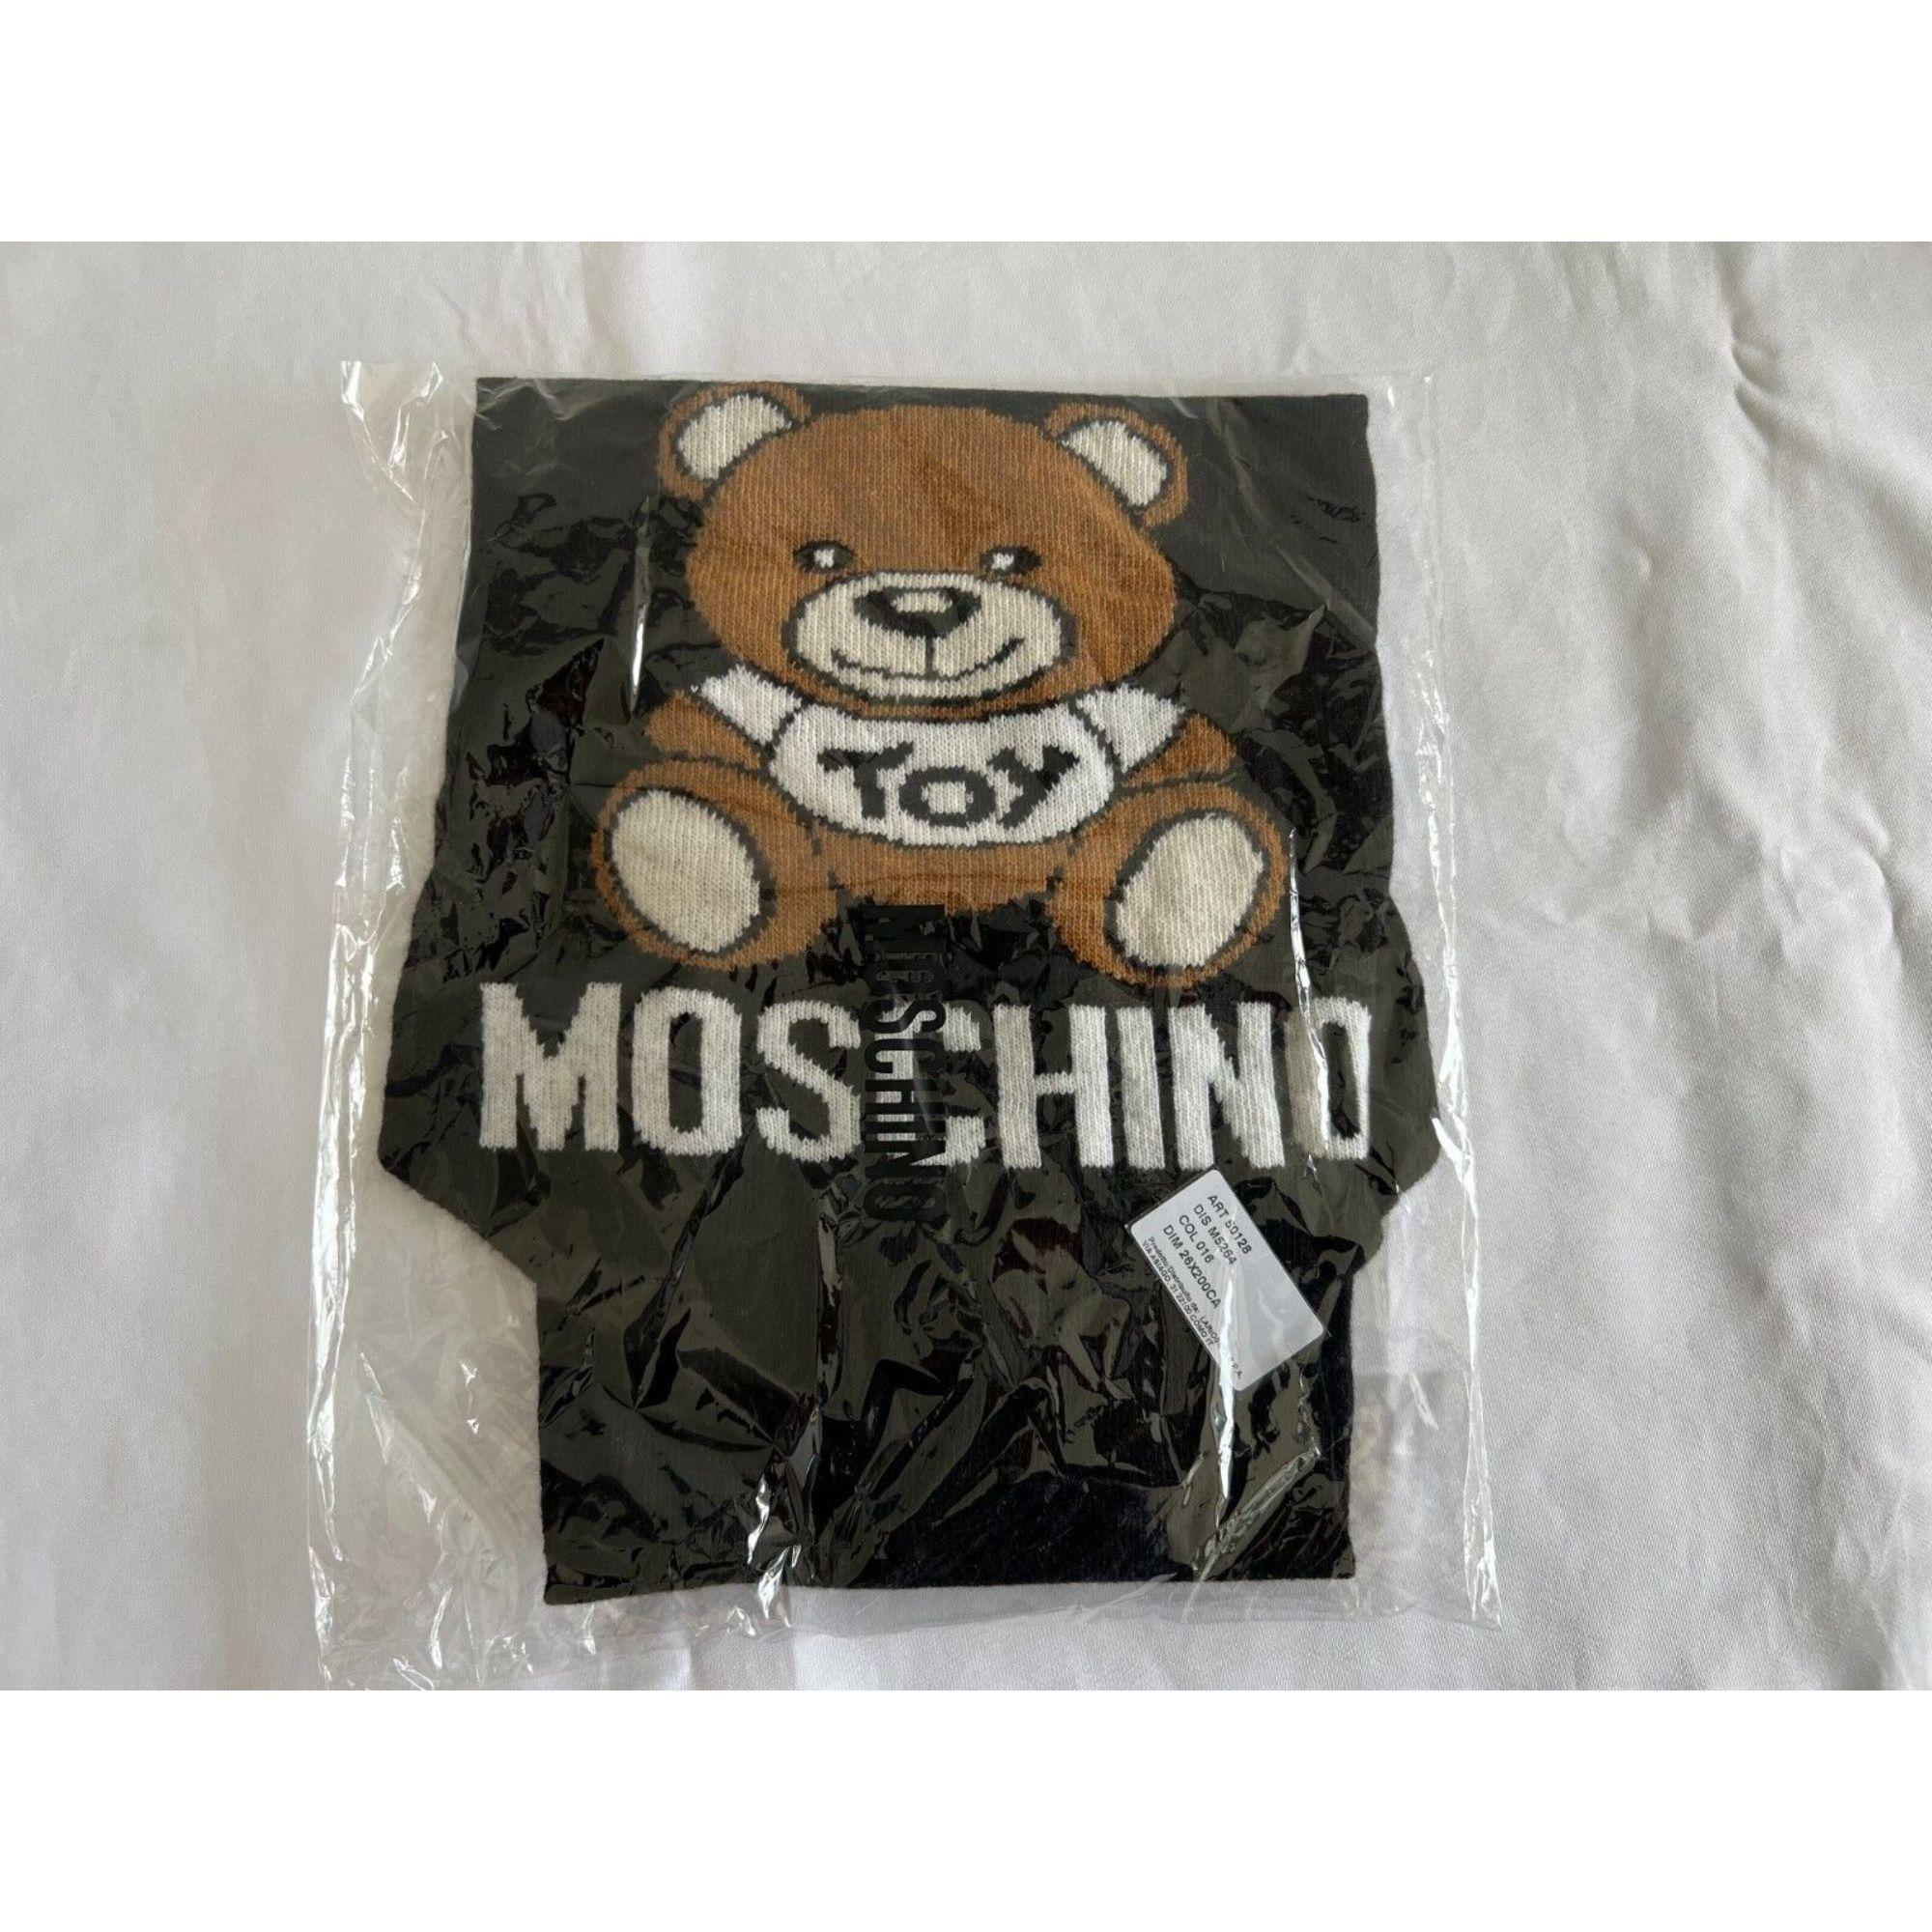 Moschino Couture Teddy Bear Black Scarf Tie Shaped by Jeremy Scott For Sale 4